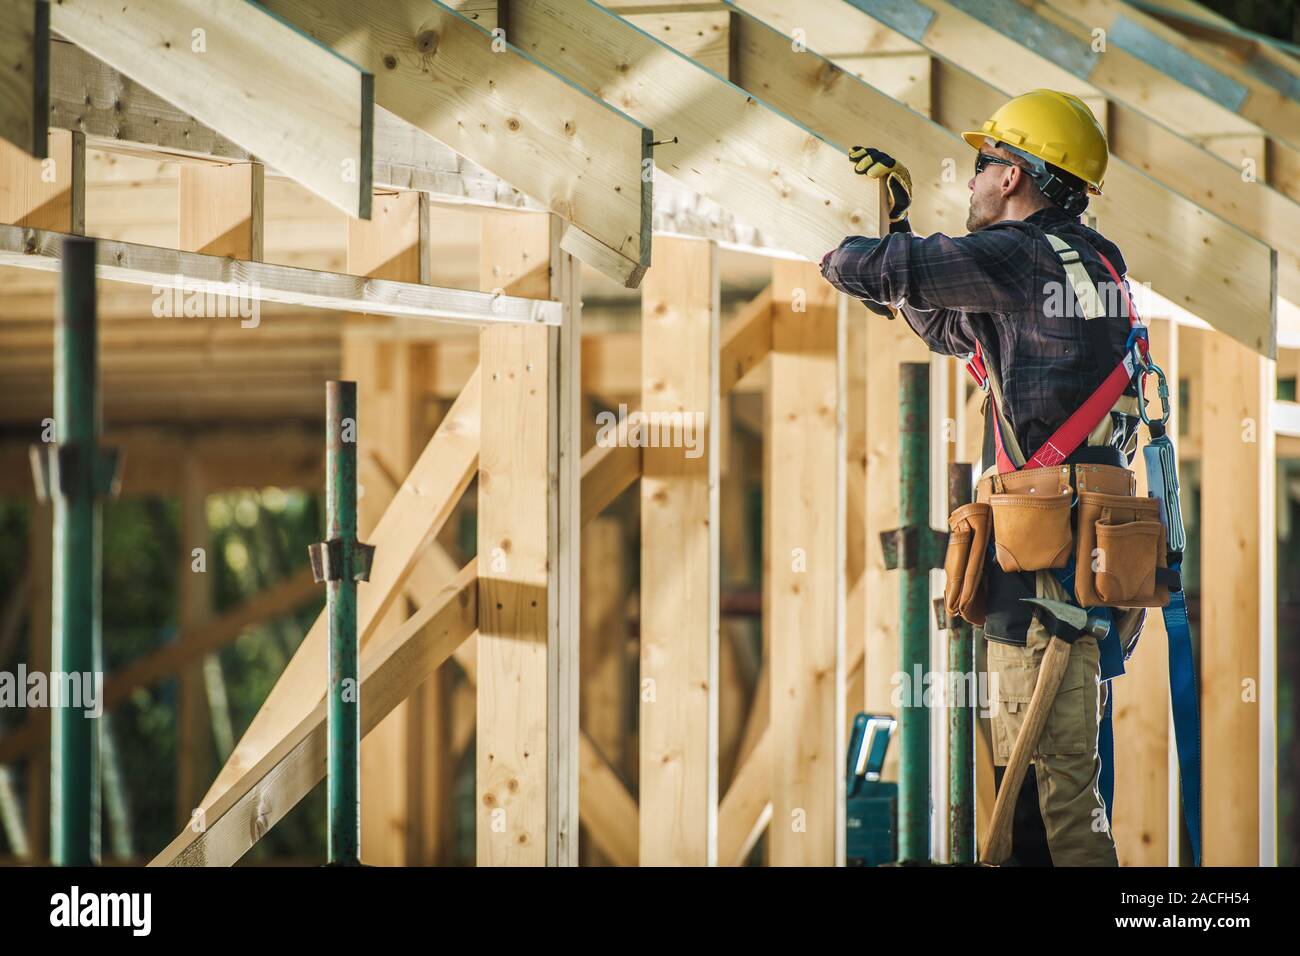 Building Industry. Wood Material House Building. Caucasian Construction Contractor at Work. Stock Photo